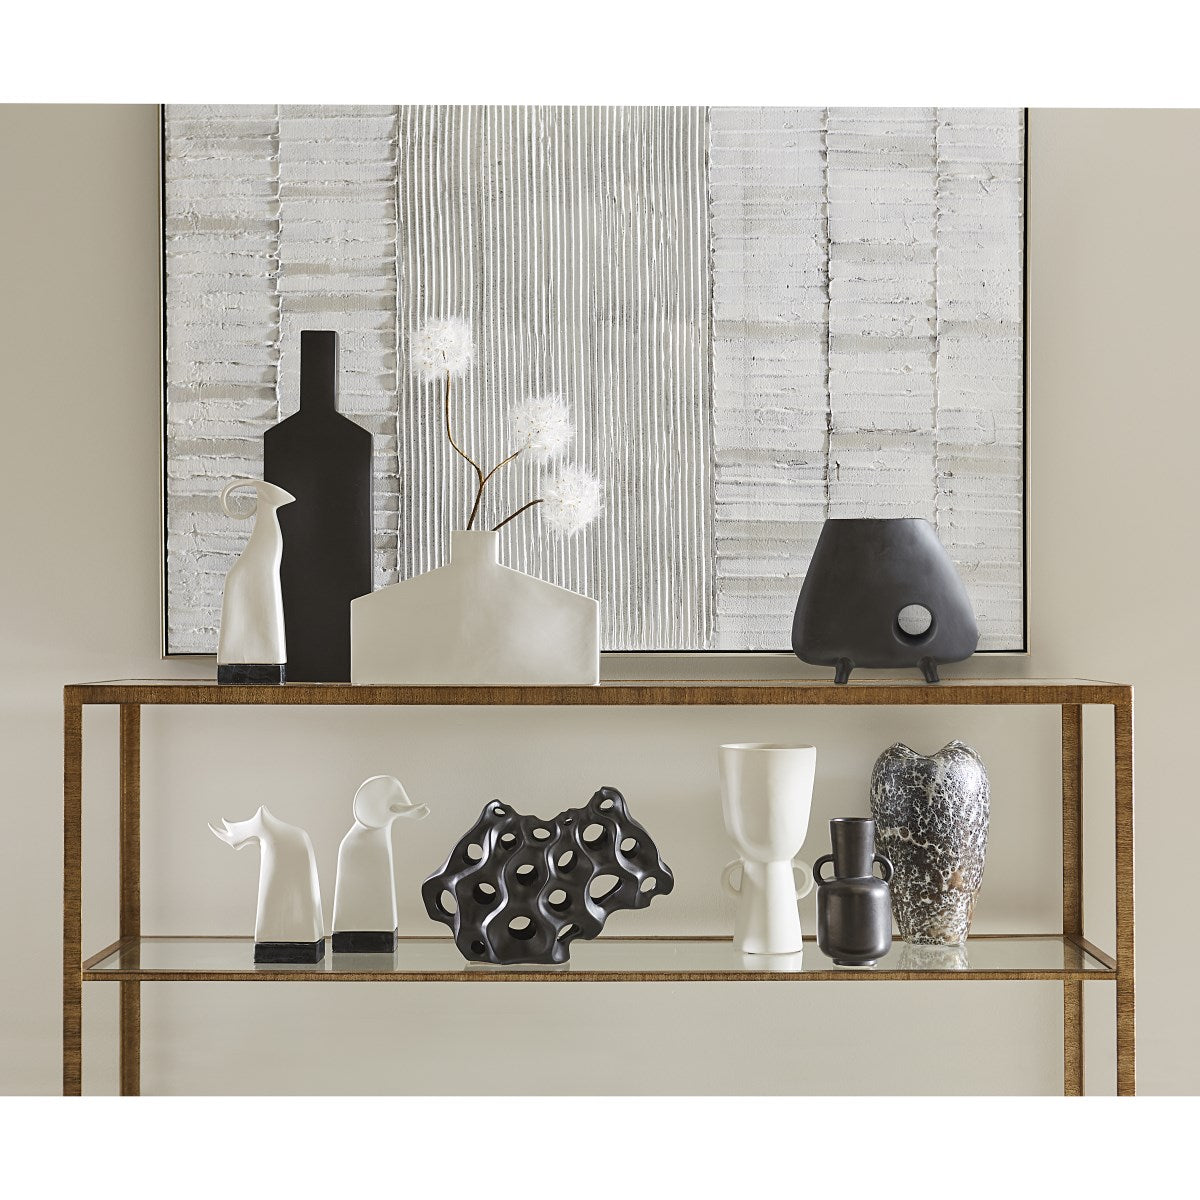 STRIE CONSOLE TABLE